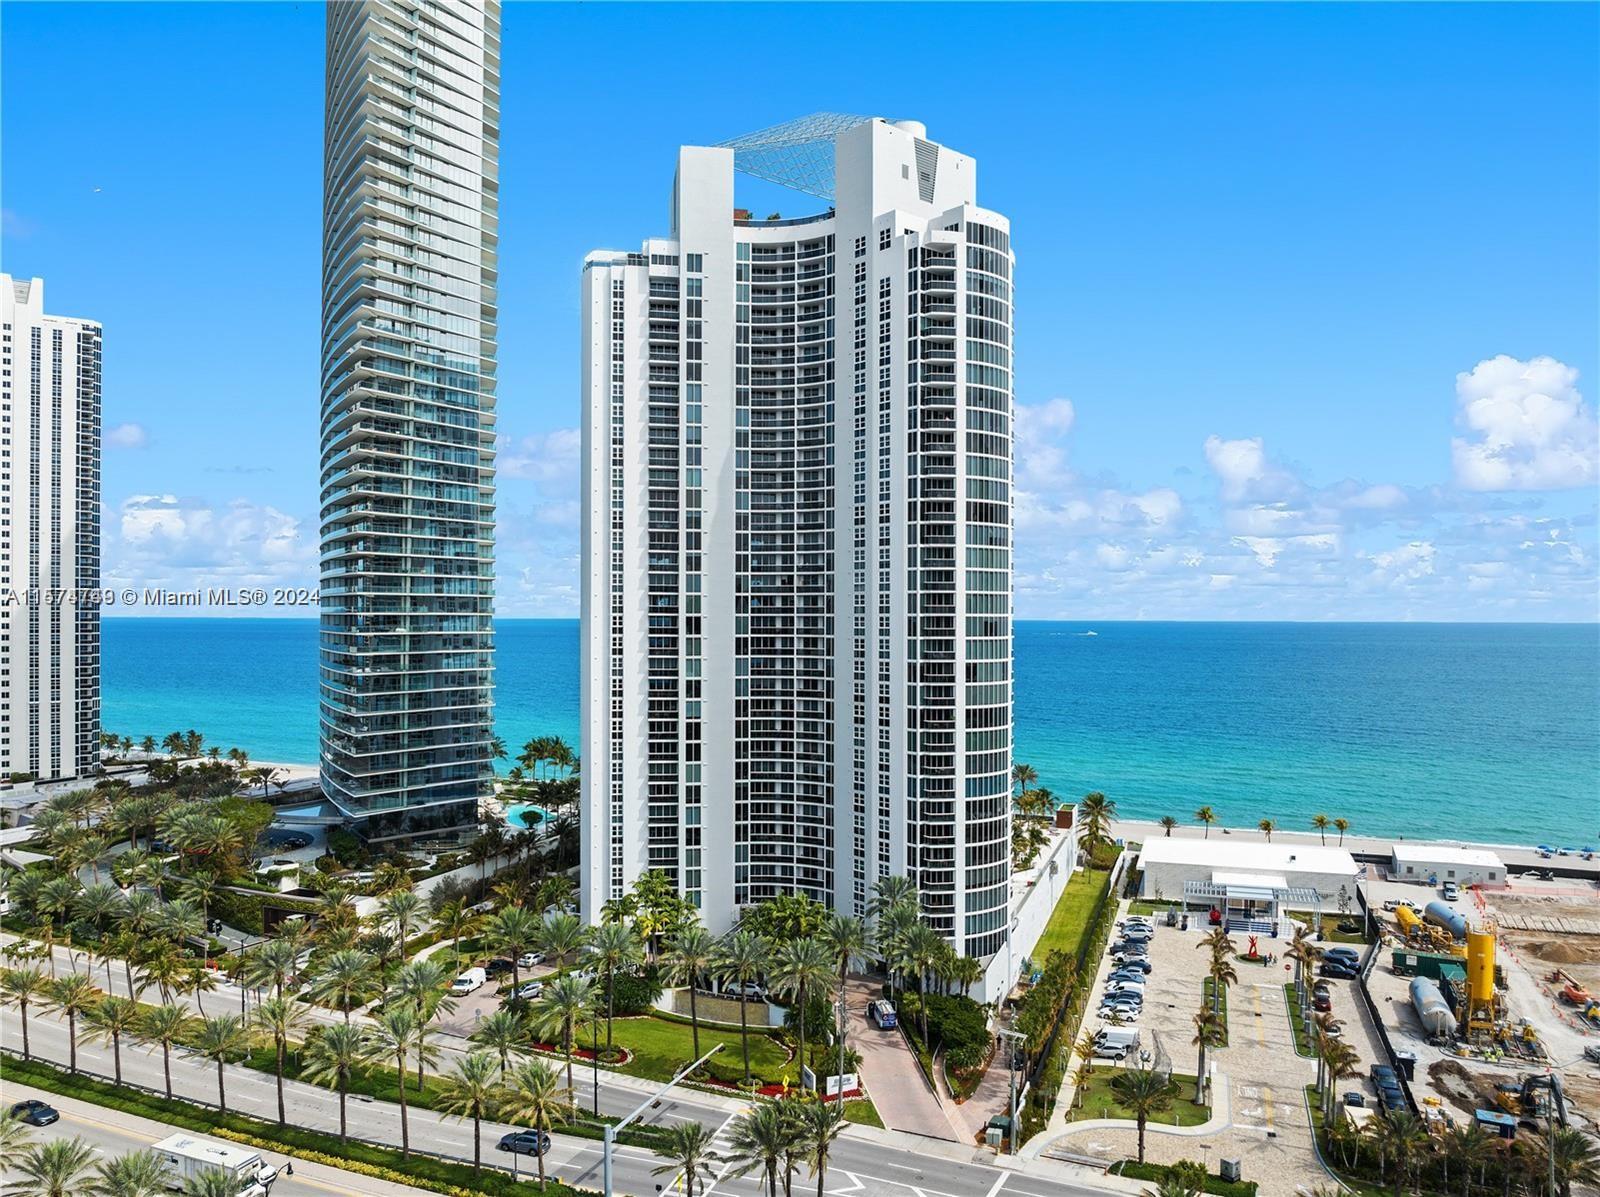 AVAILABLE FROM MAY 1st for 6 months! Enjoy stunning ocean & city views from this beautiful 3 bedroom (a den with window has a sleeping sofa and can be used as a third bedroom/office /2.5 bath in the heart of Sunny Isles. Unit is Fully furnished. Step off your elevator to your private foyer.Enjoy your family dinners in the beautiful formal dining room. Modern kitchen has fabulous views of the city, master bedroom has huge walk in closets & bathroom with double sink vanity.Split bedroom floorplan.The unit is flow through with East &West balconies. Very modern & gorgeous Condo minutes from Aventura Mall &Bal Harbour shops.Amenities including full beach &pool service, bistro bar, tennis courts, party room, rooftop jacuzzi,spa,gym,valet,24hr security. Hurry,this is the life of reach & famous!!!